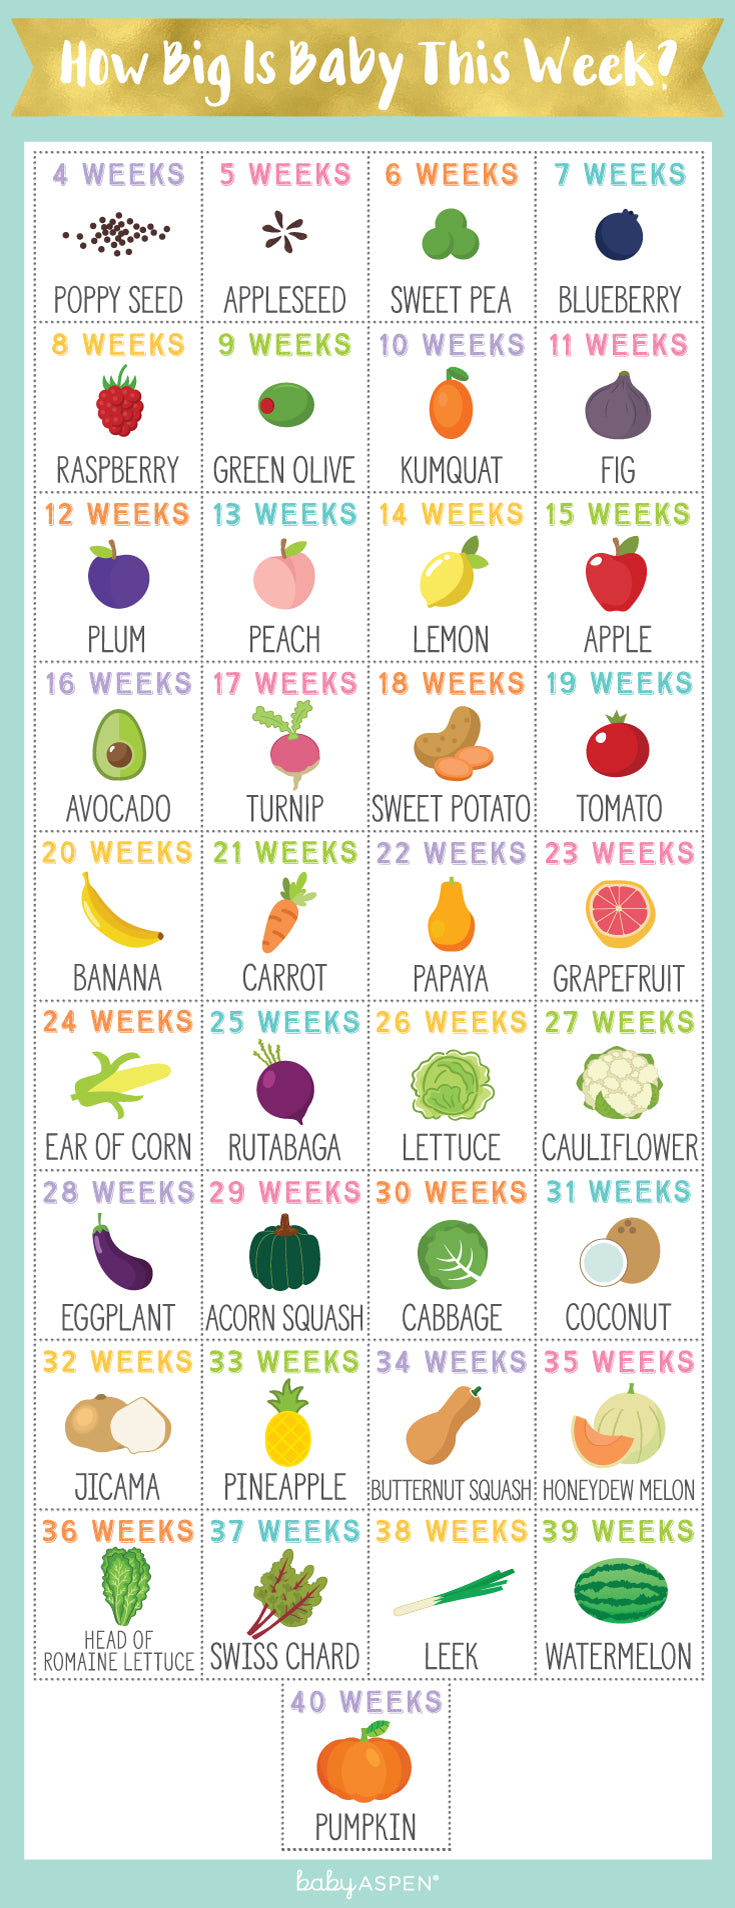 Baby Size Chart | How Big is Baby This Week? [Infographic] | Baby Aspen